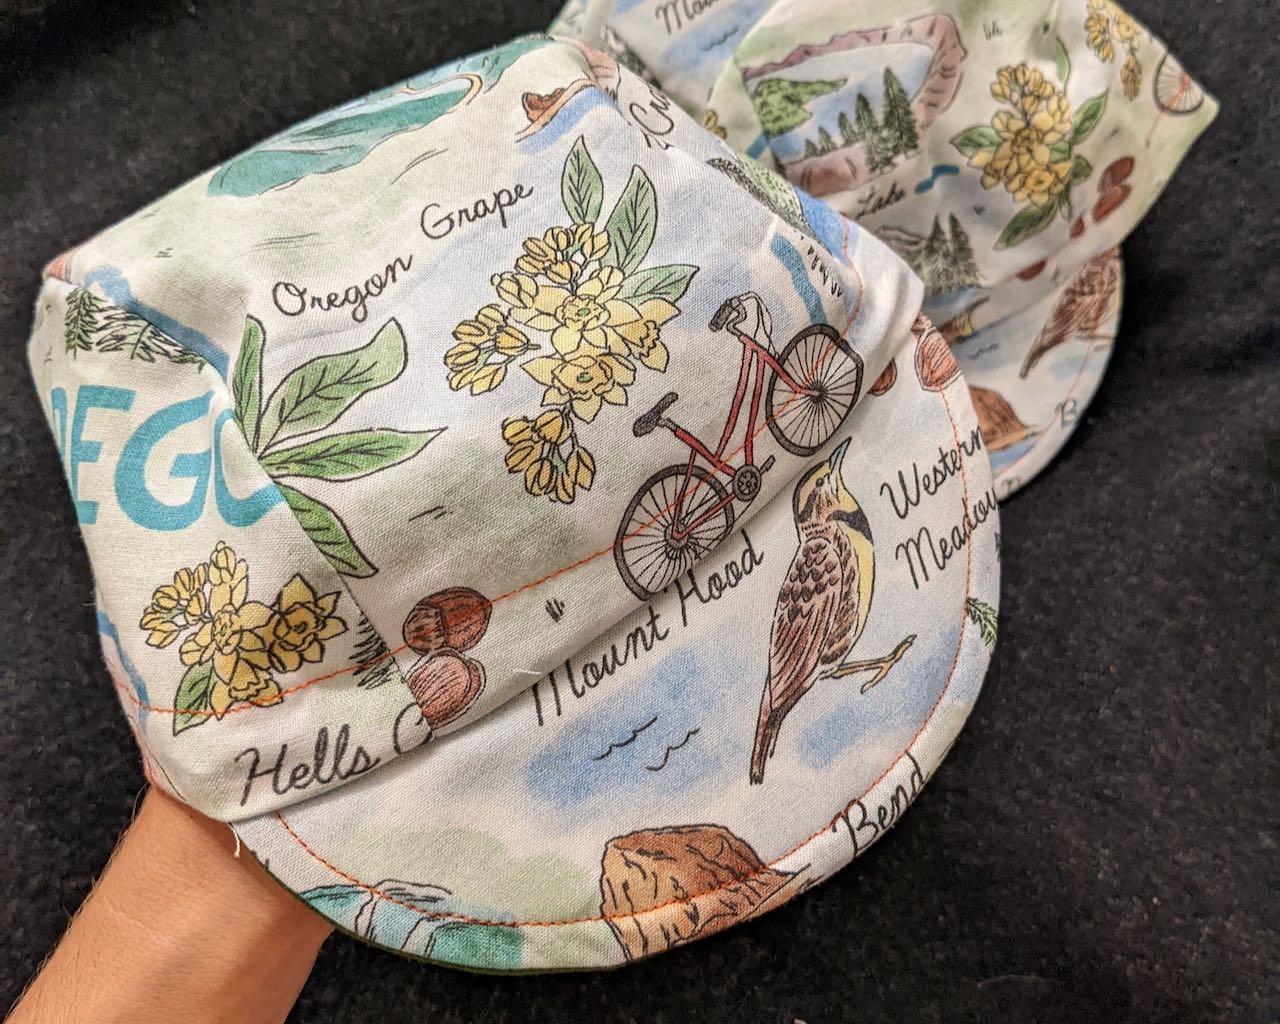 A pile of cycling caps made out of fabric with a bunch of Oregon landmarks on it.